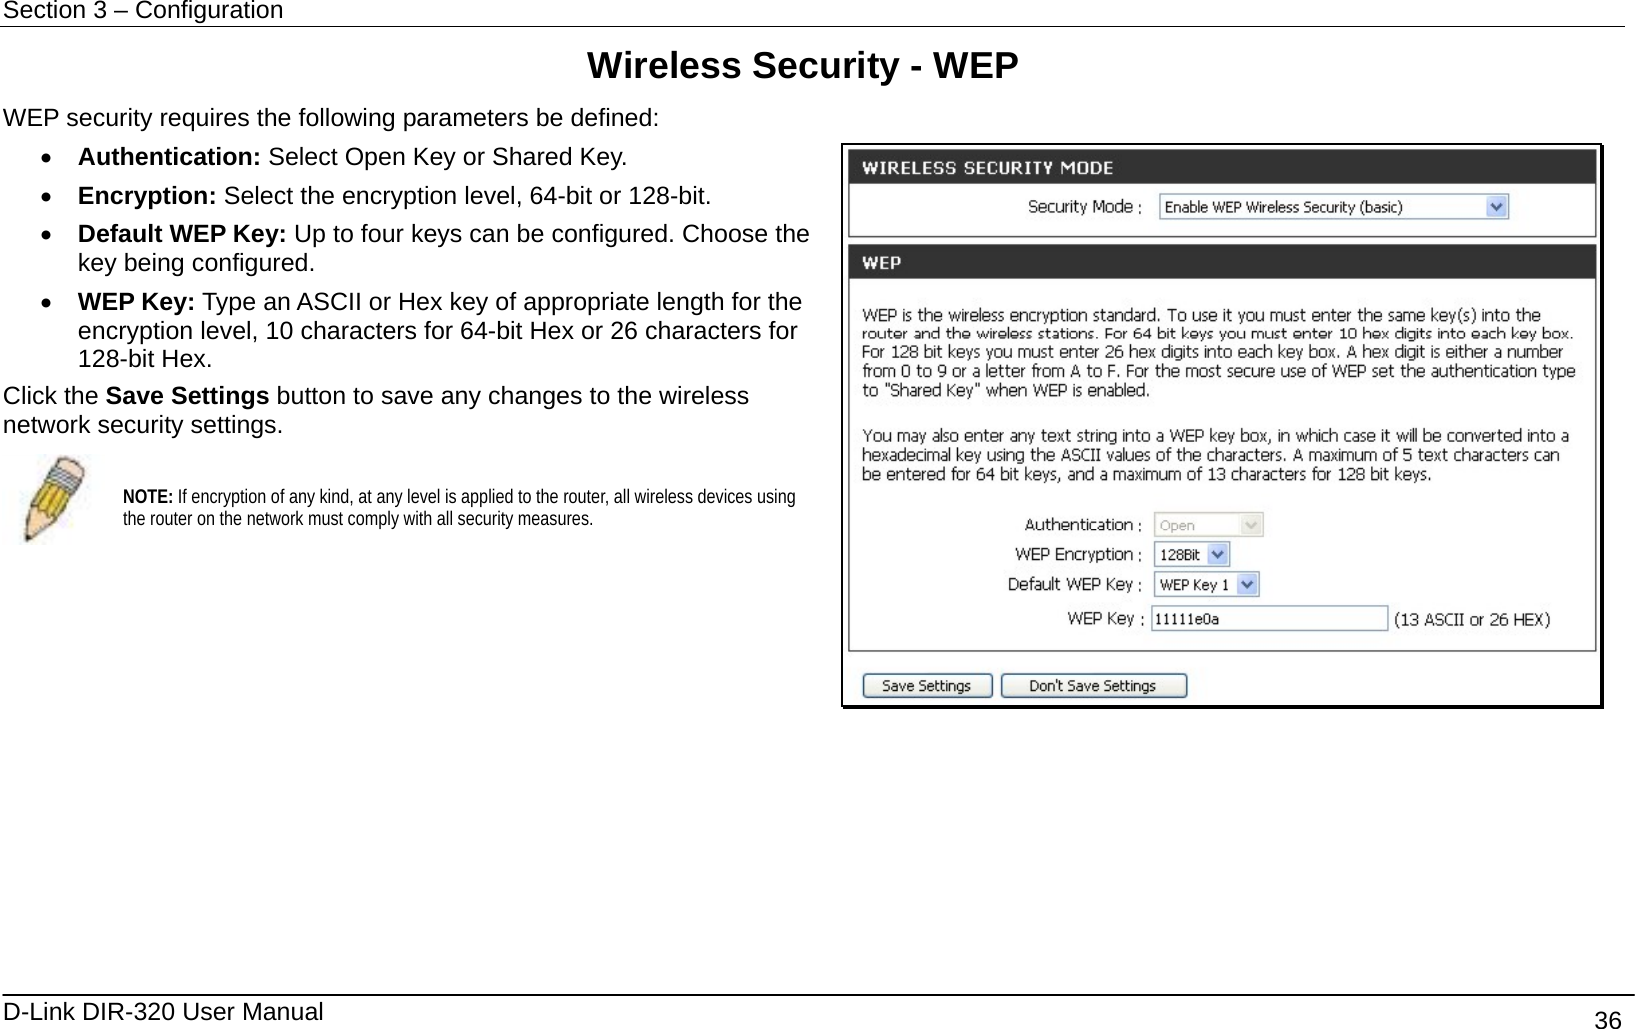 Section 3 – Configuration   D-Link DIR-320 User Manual                                       36 Wireless Security - WEP WEP security requires the following parameters be defined: •  Authentication: Select Open Key or Shared Key. •  Encryption: Select the encryption level, 64-bit or 128-bit. •  Default WEP Key: Up to four keys can be configured. Choose the key being configured. •  WEP Key: Type an ASCII or Hex key of appropriate length for the encryption level, 10 characters for 64-bit Hex or 26 characters for 128-bit Hex. Click the Save Settings button to save any changes to the wireless network security settings.  NOTE: If encryption of any kind, at any level is applied to the router, all wireless devices using the router on the network must comply with all security measures.         